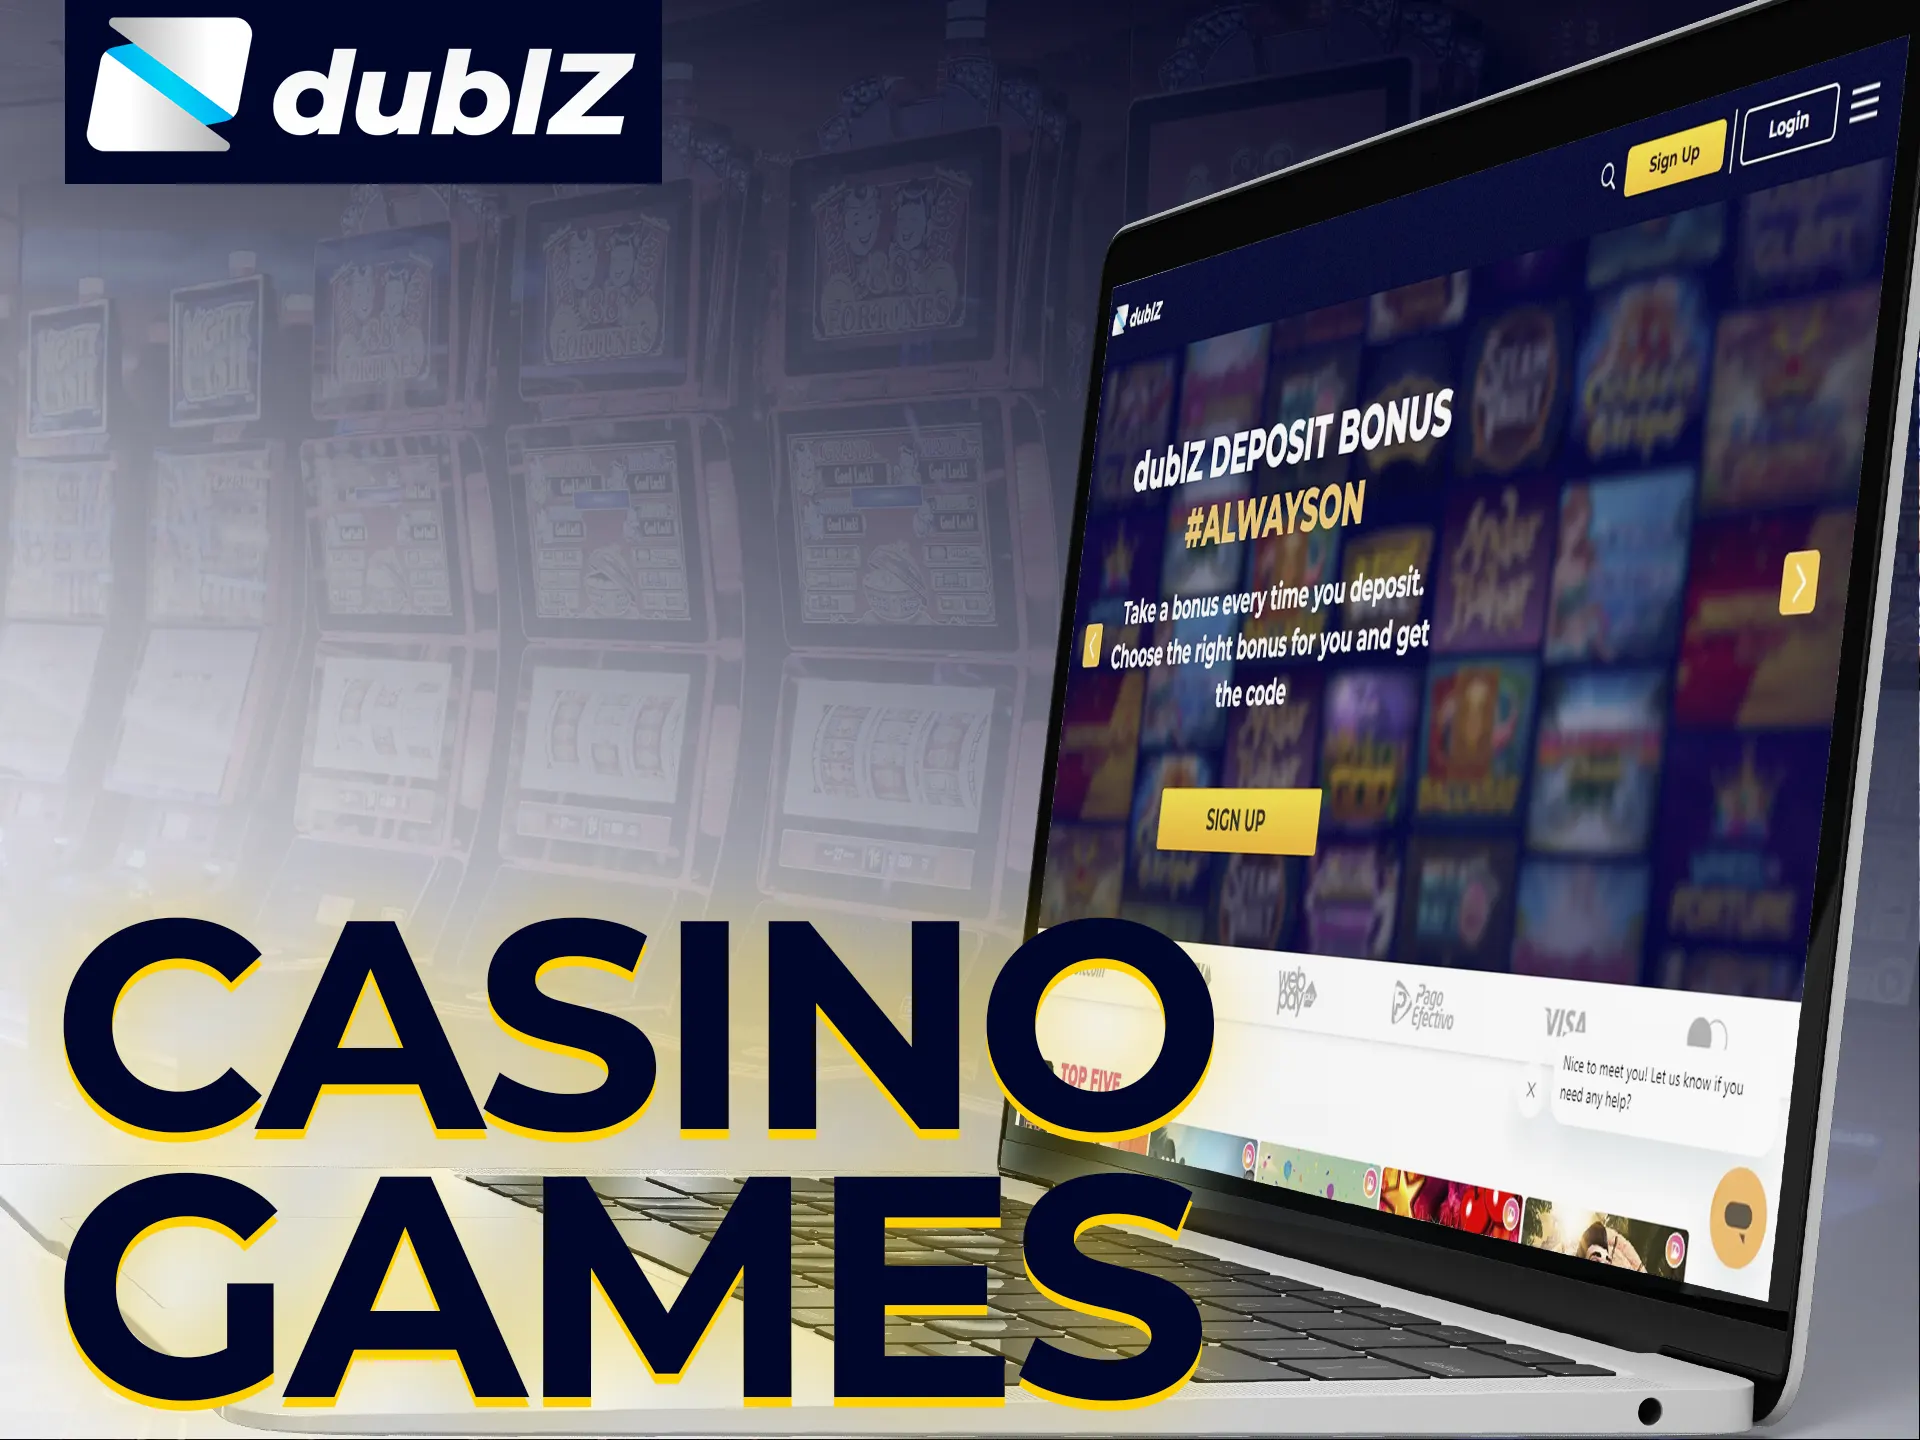 On Dublz in the casino section you can play a lot of exciting games.